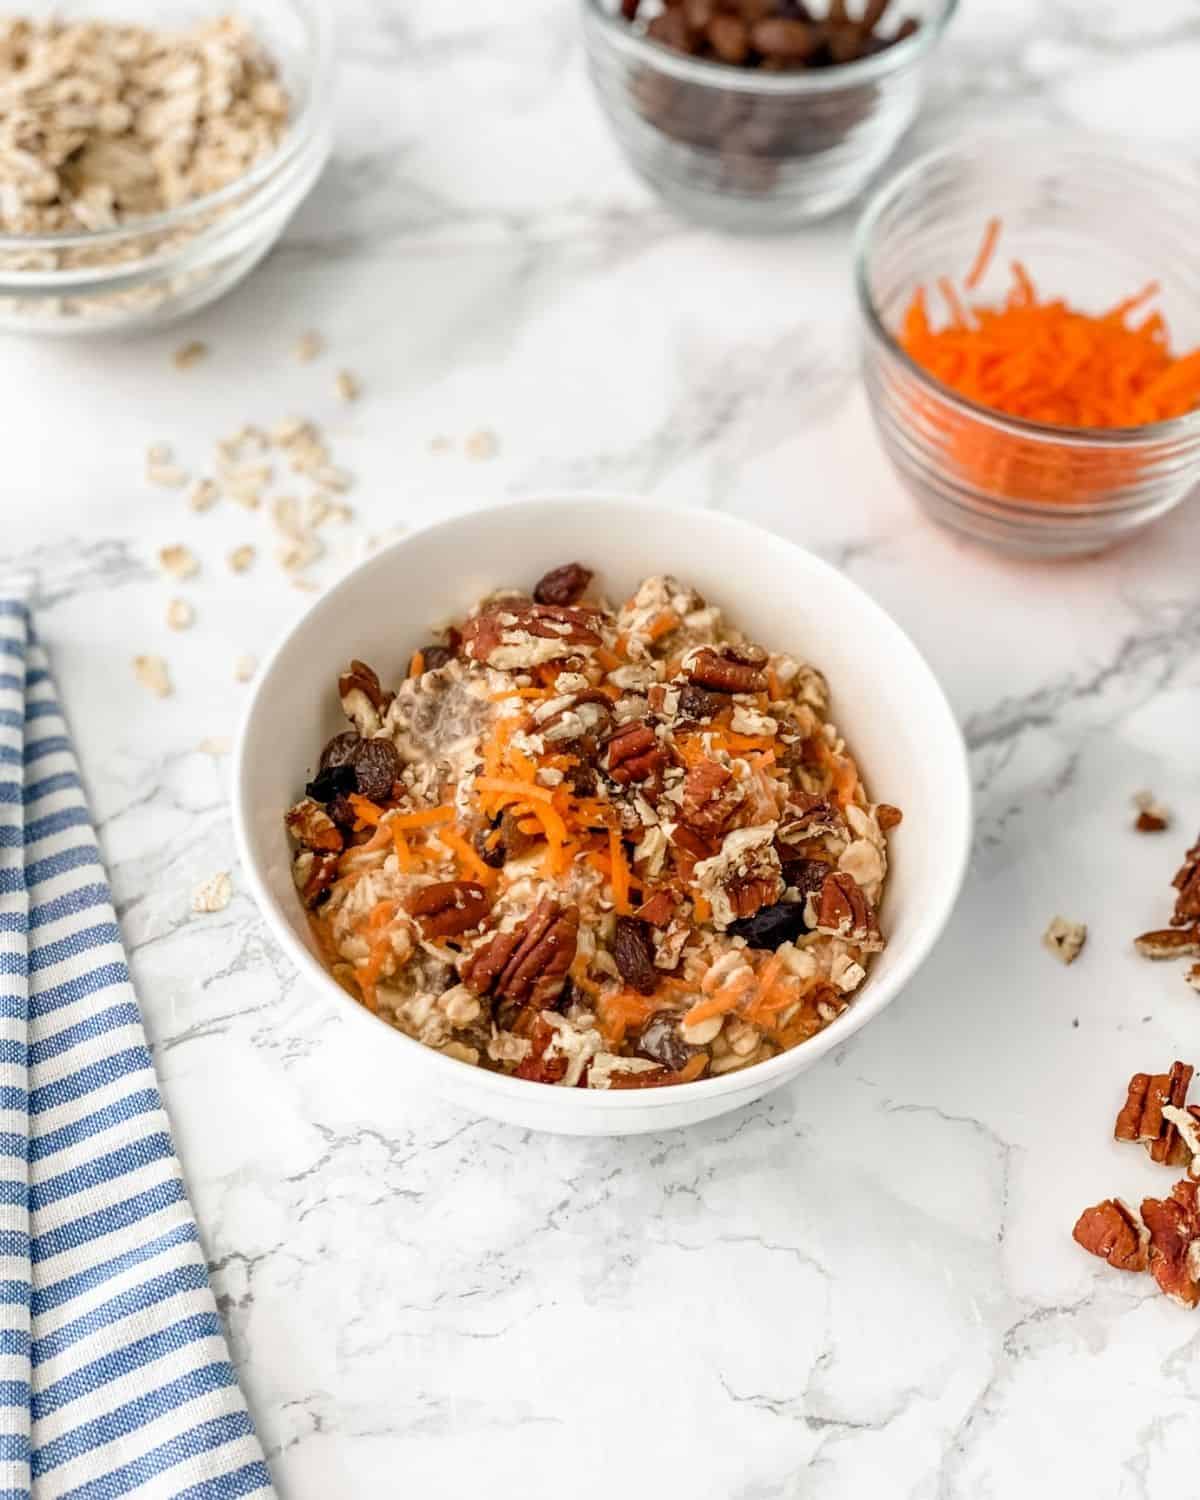 picture of carrot cake overnight oats with shredded carrots, pecans, and oats around the bowl.